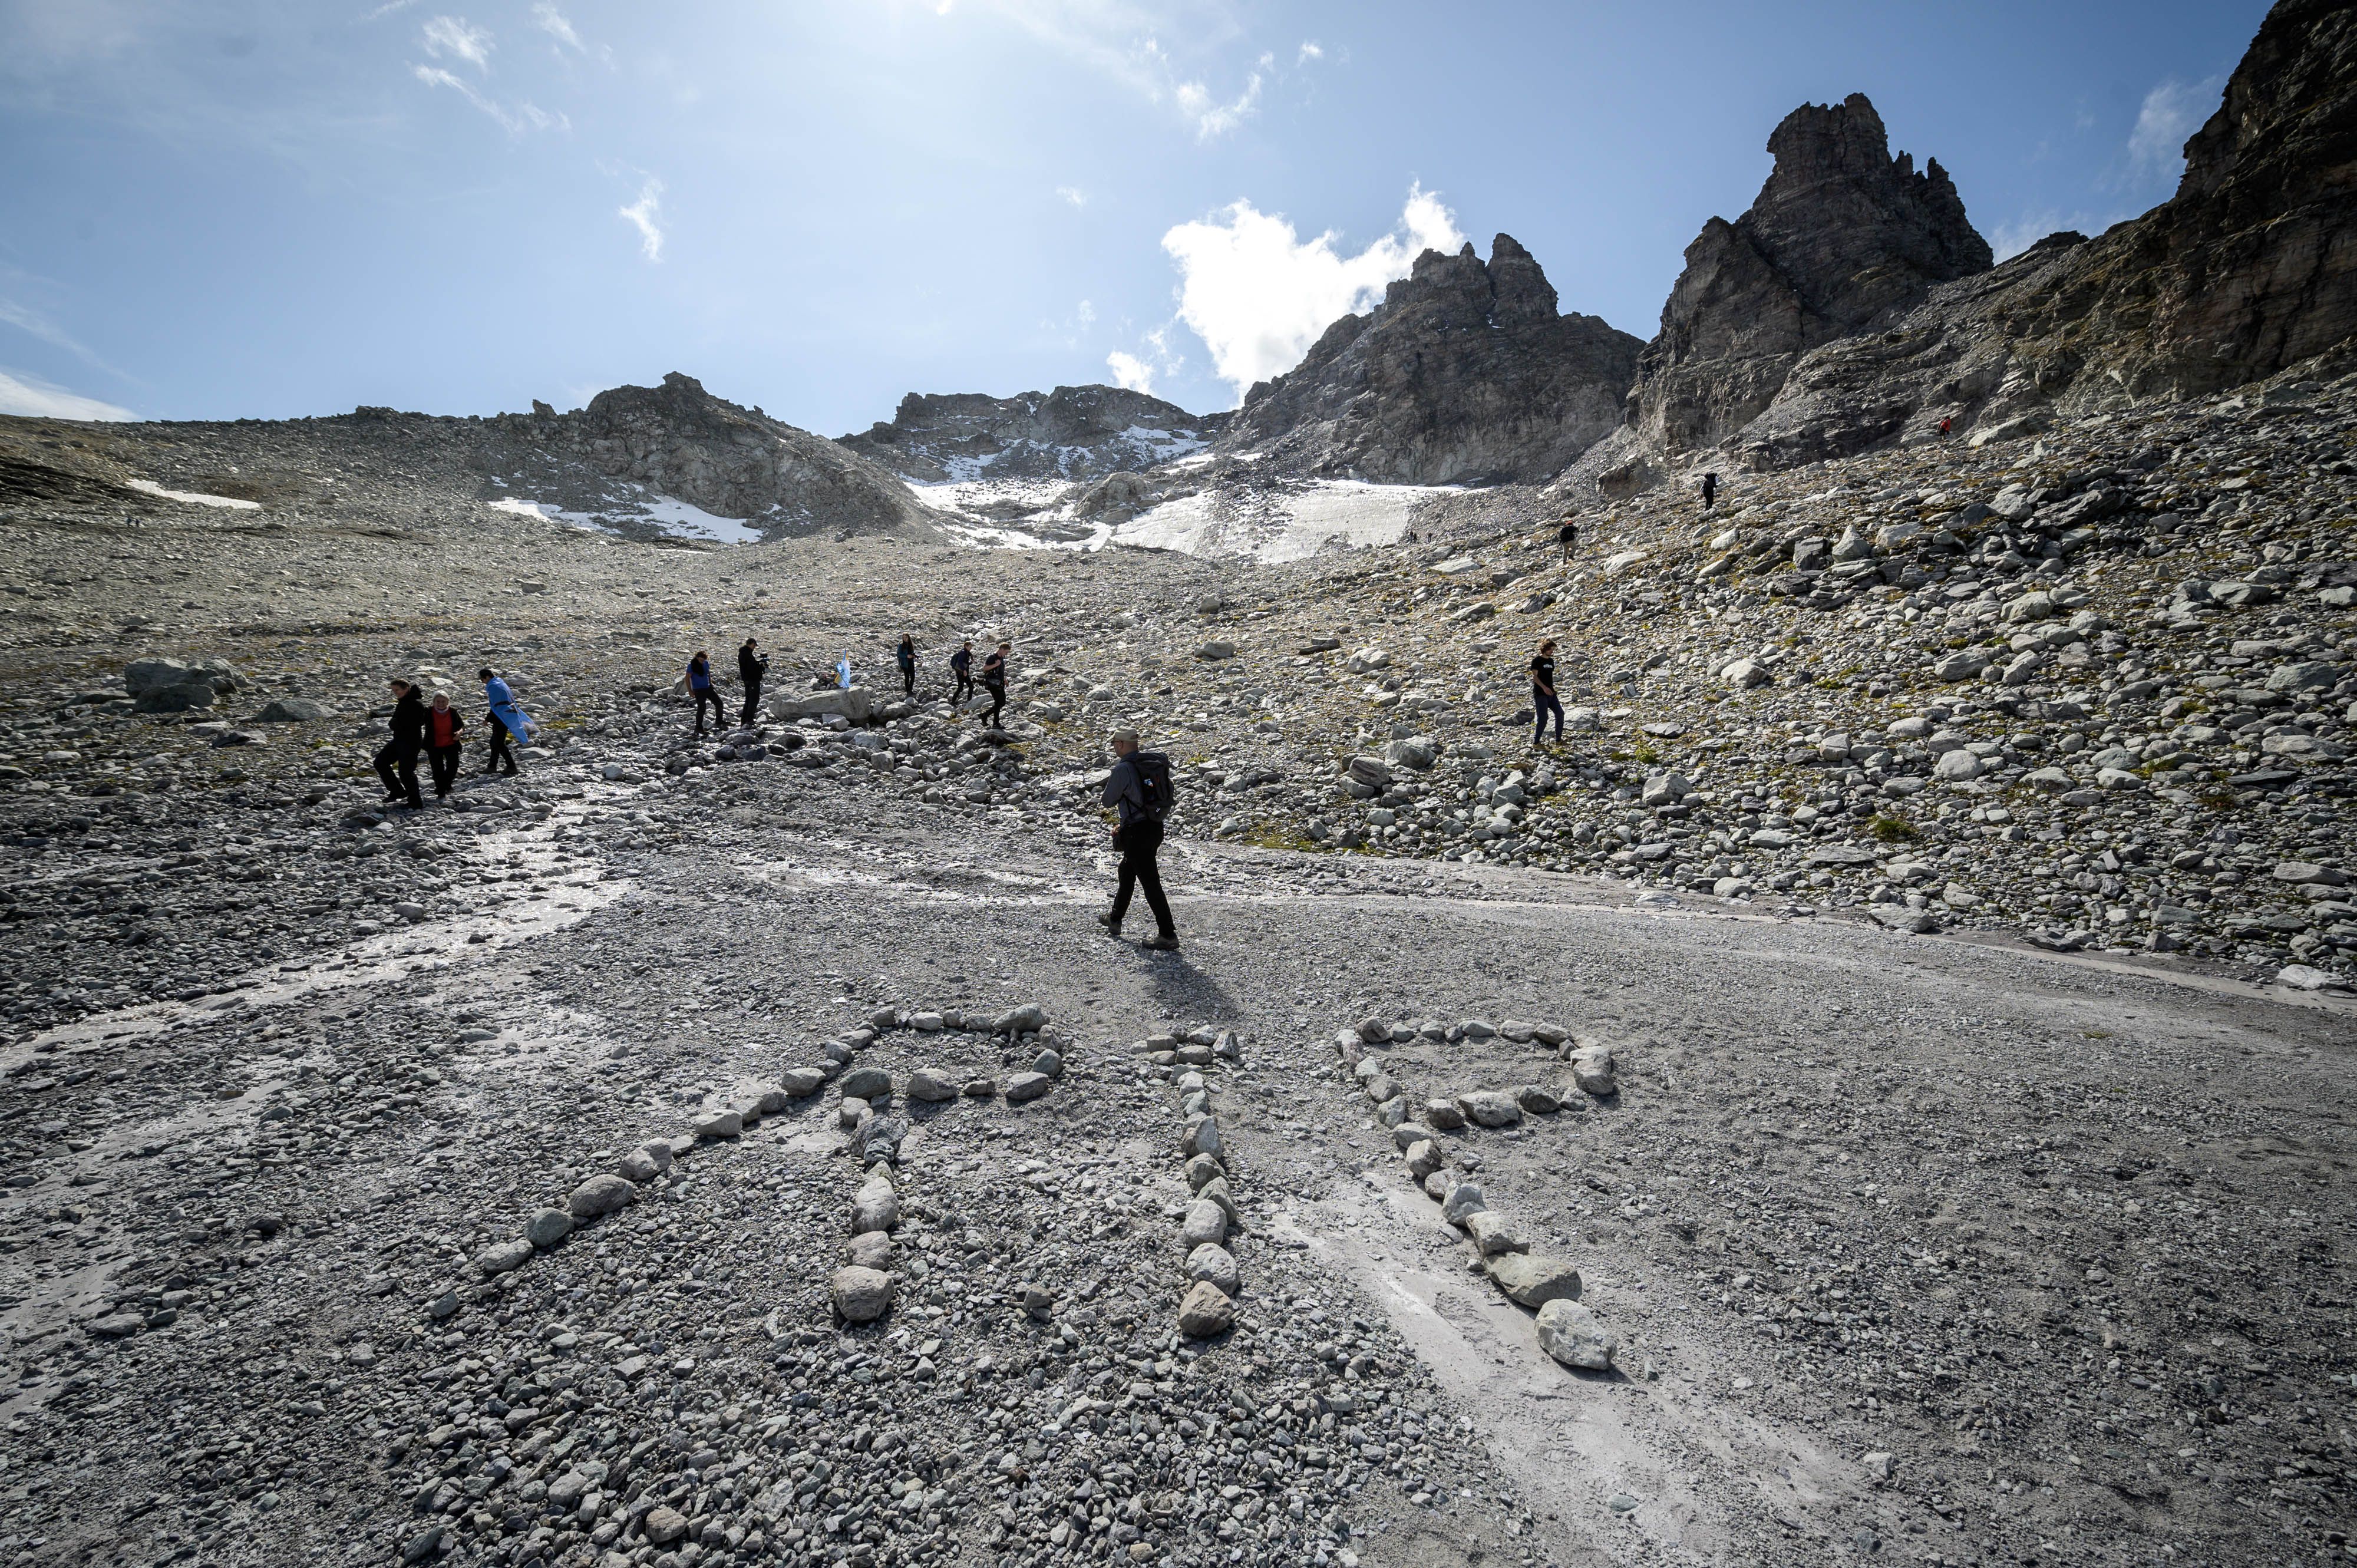  People take part in a ceremony to mark the 'death' of the Pizol glacier (Pizolgletscher) on September 22, 2019 above Mels, eastern Switzerland. 